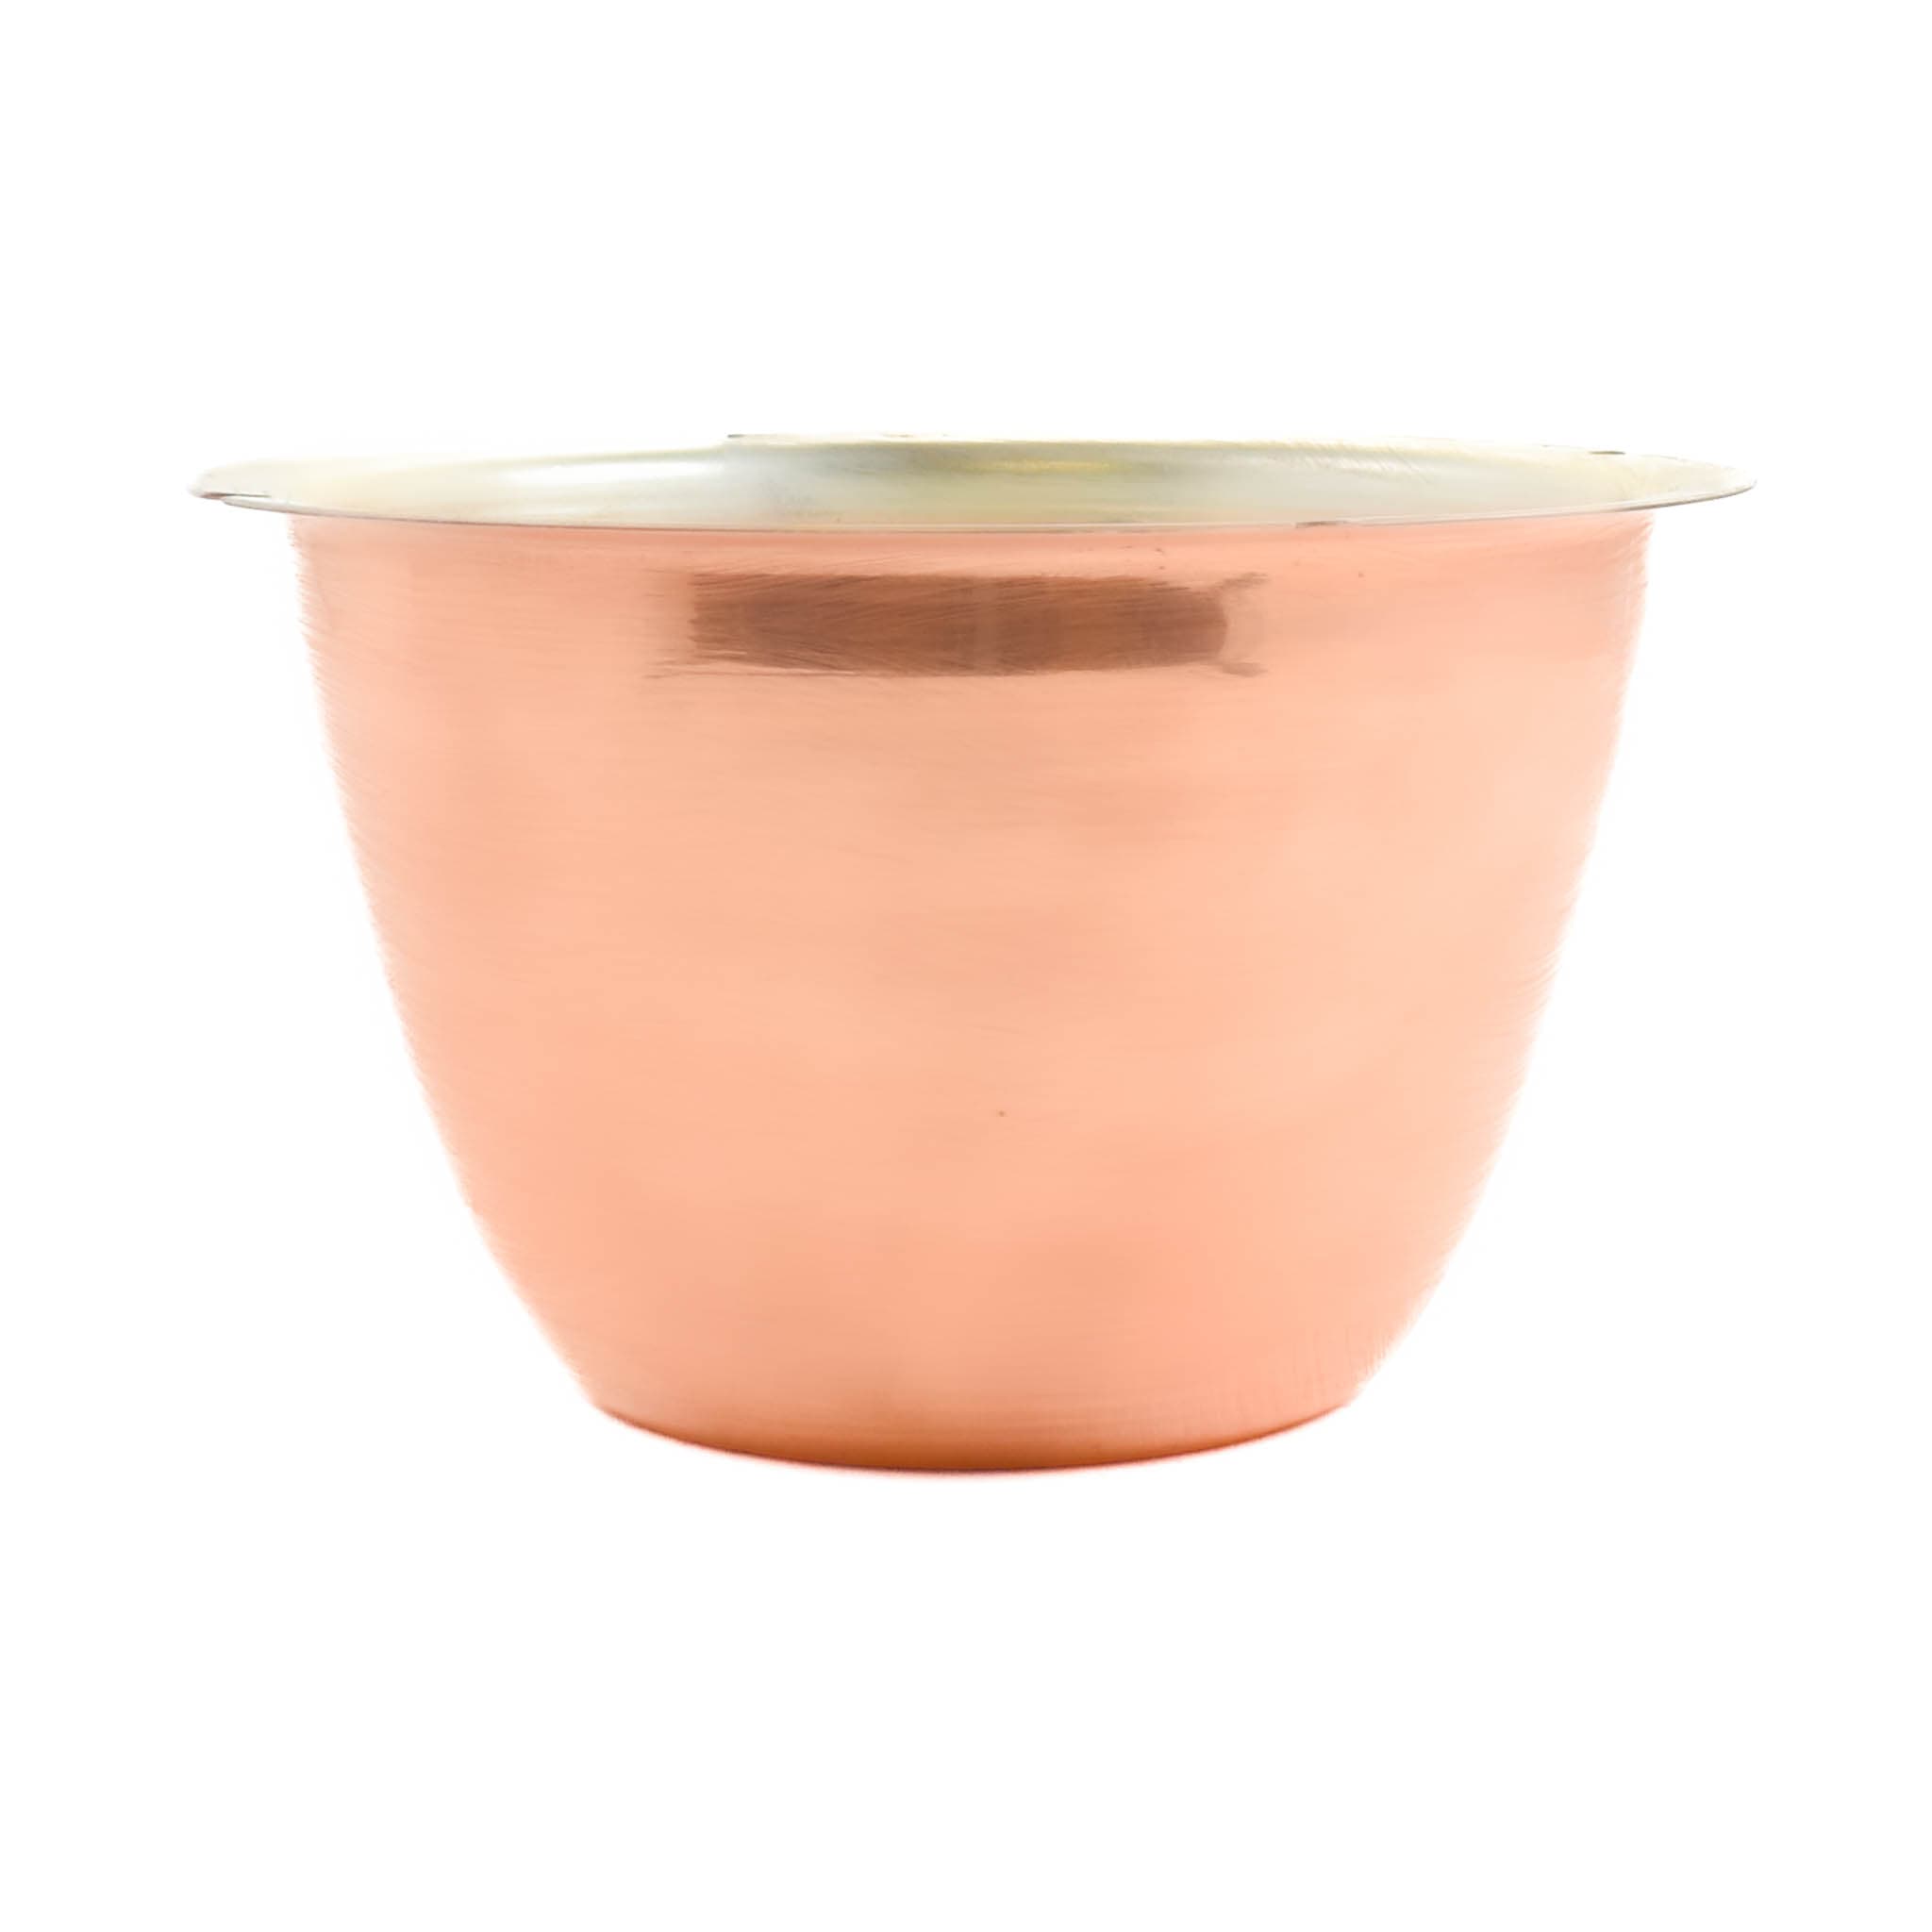 Netherton Foundry Copper Pudding Mould, 1.5litre